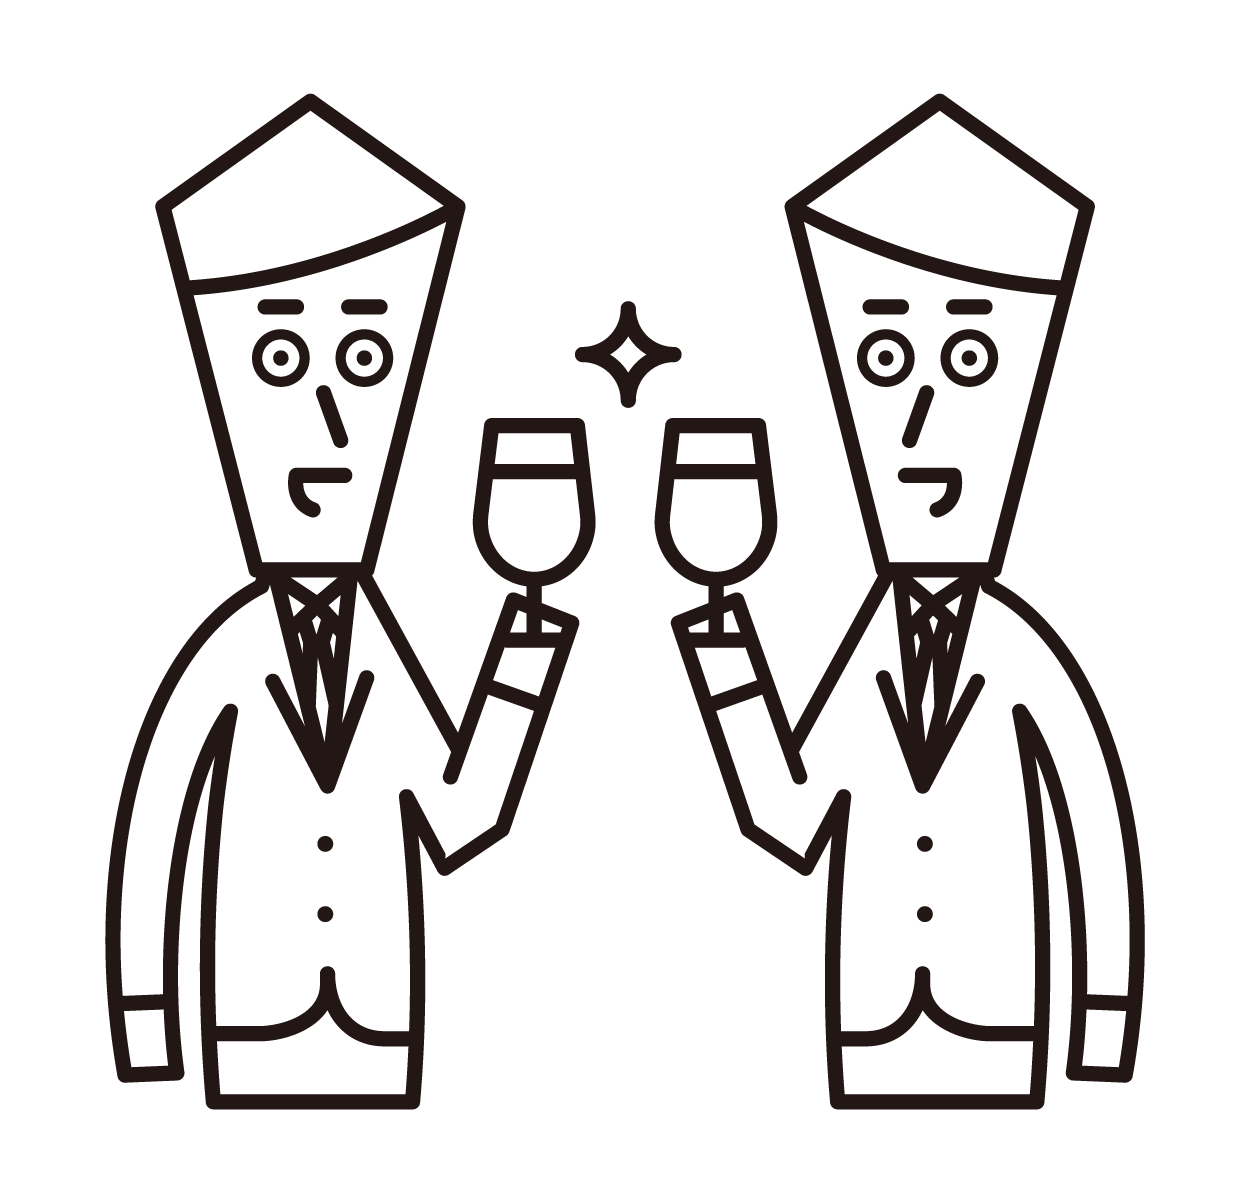 Illustration of people (men) toasting with wine